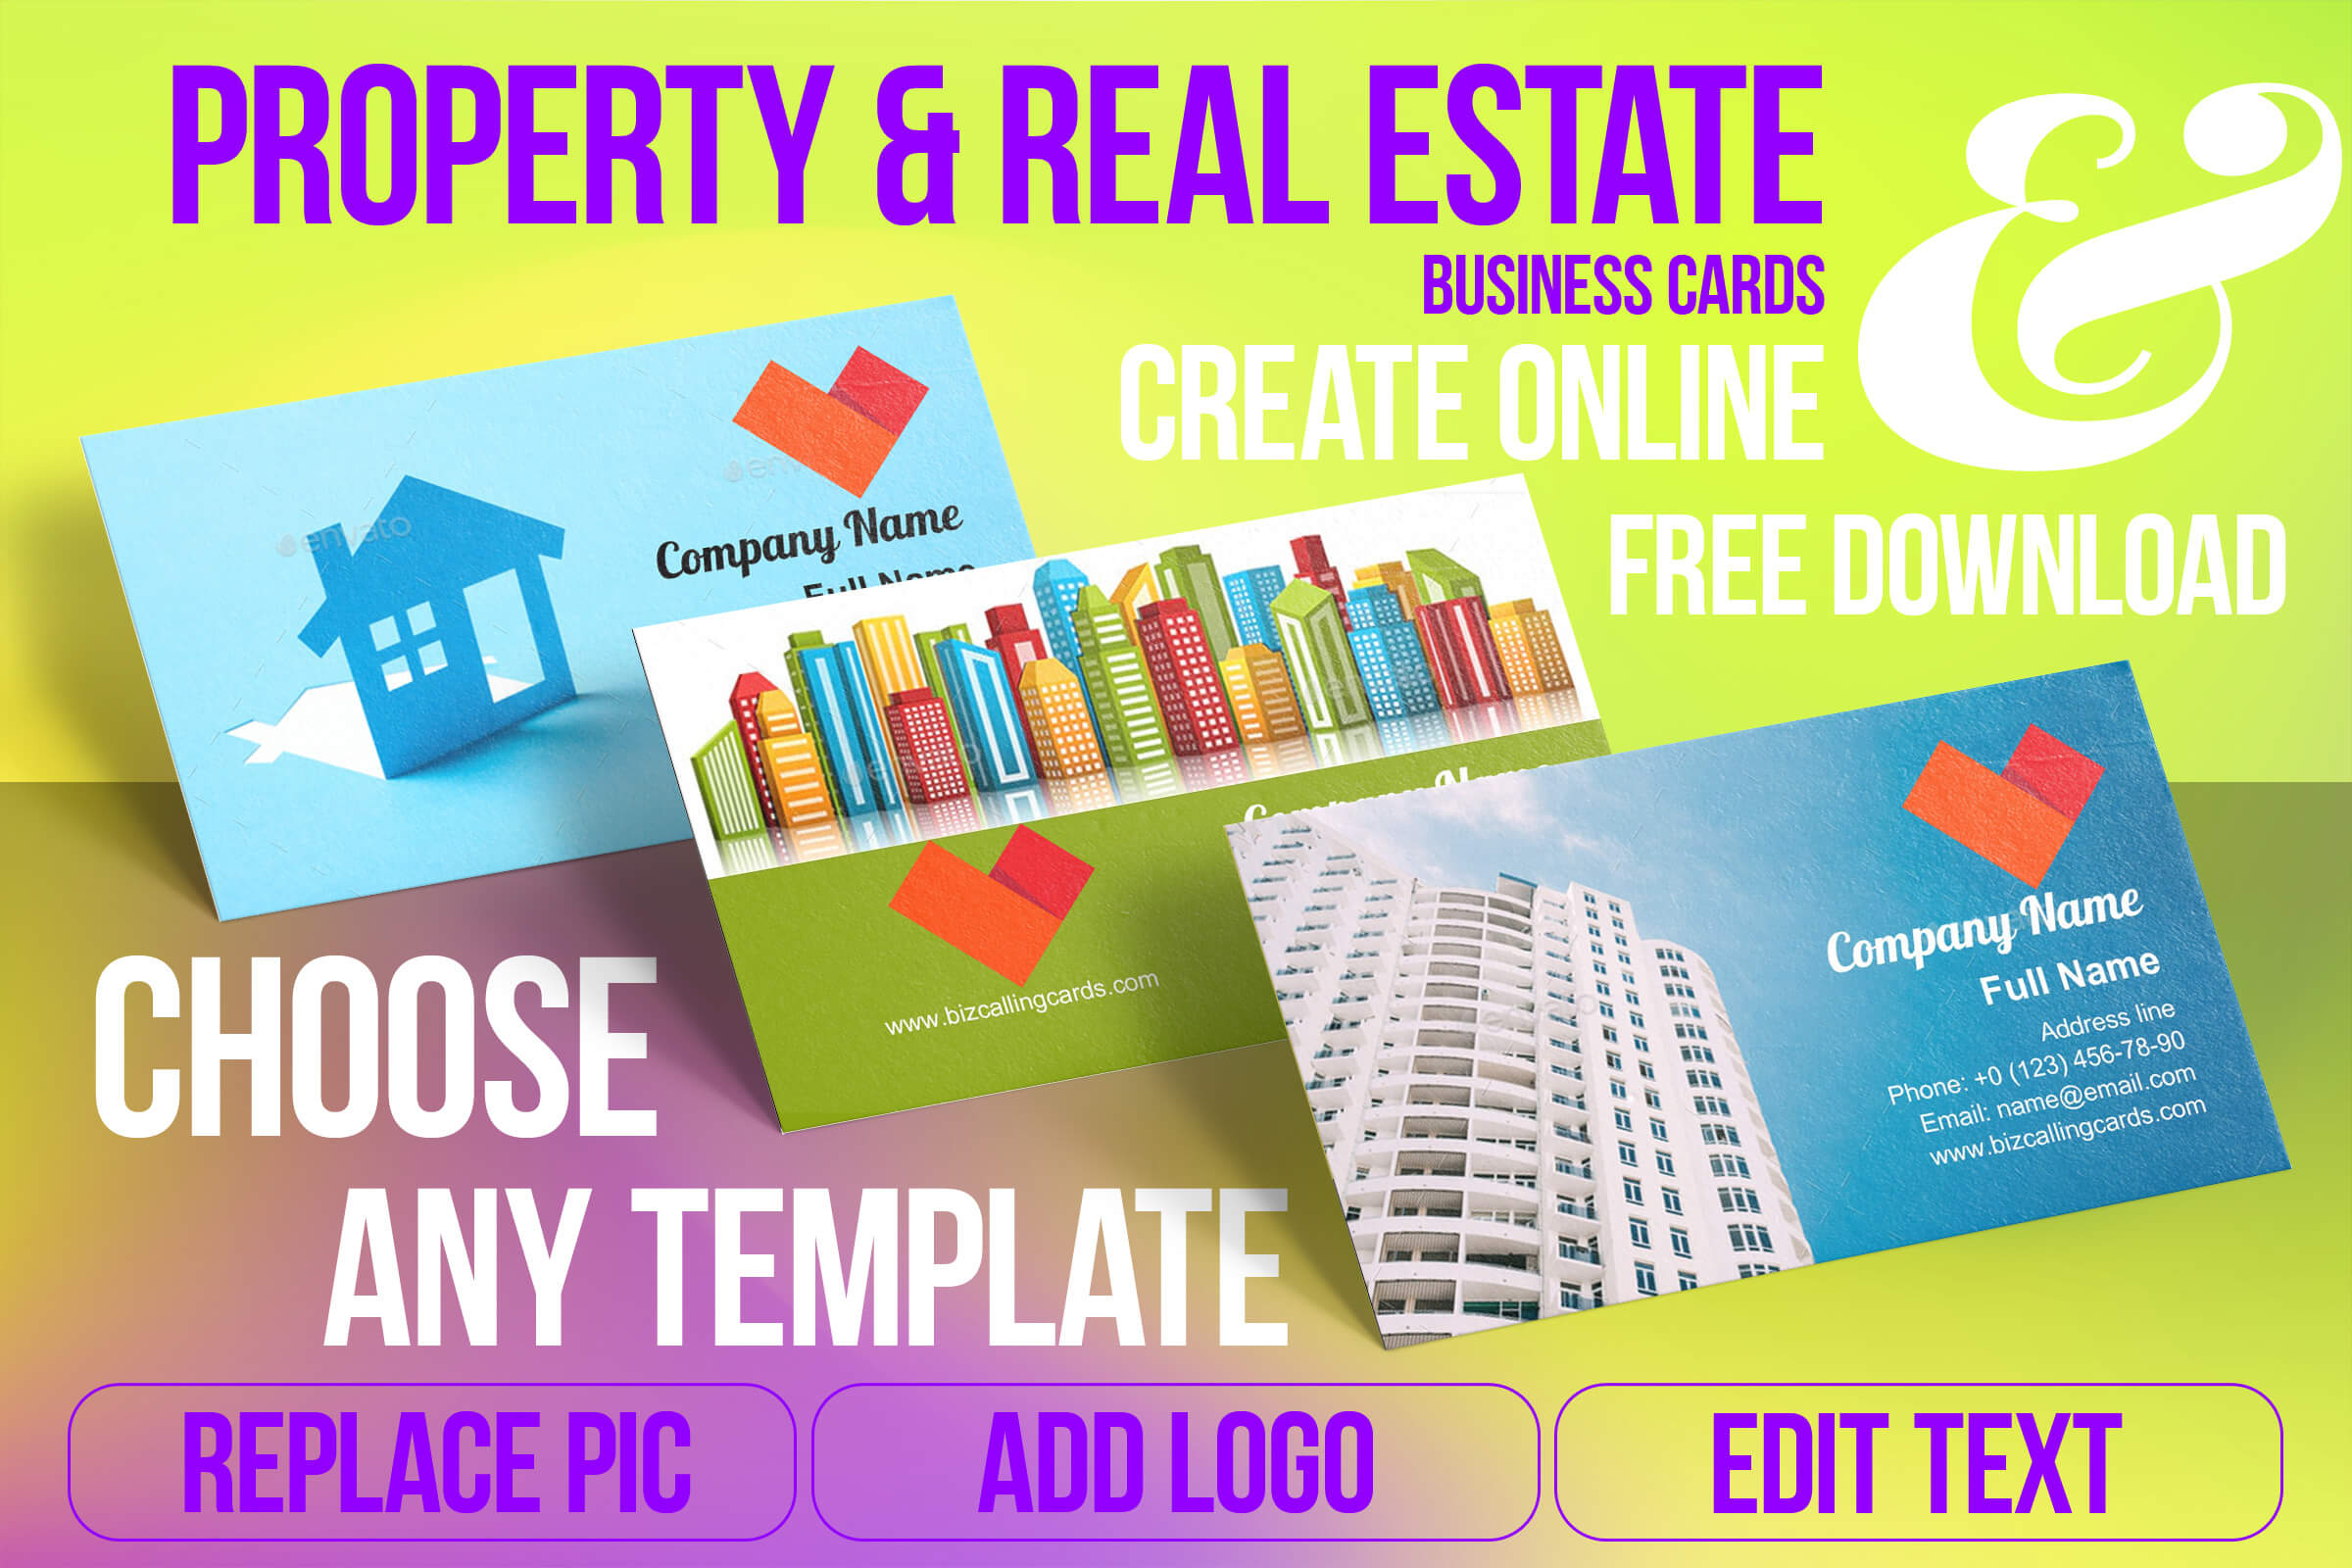 Real Estate Business Card Samples For Create Custom Design Pertaining To Real Estate Business Cards Templates Free